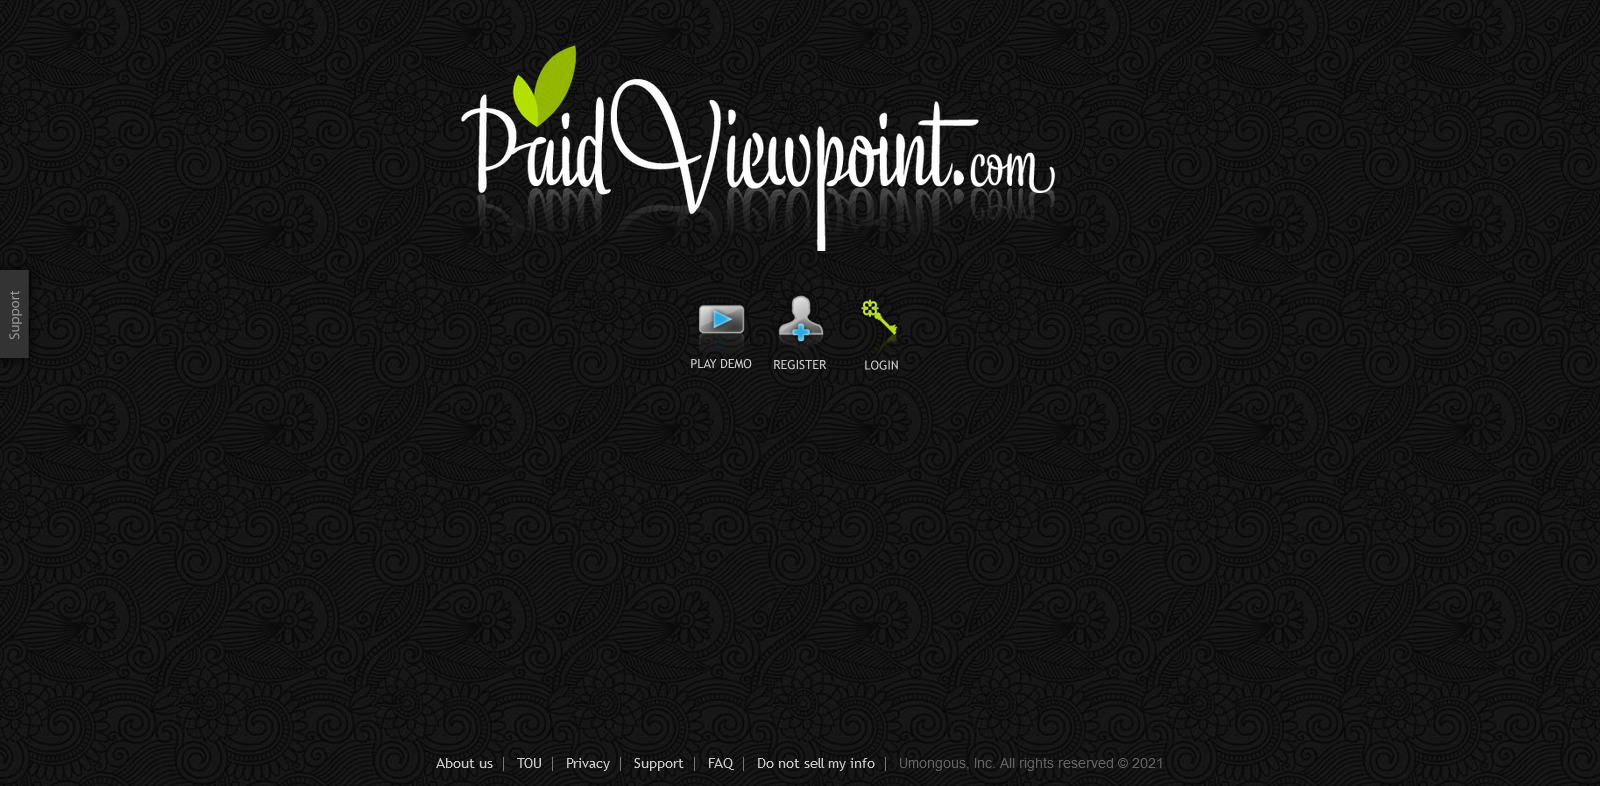 paidviewpoint